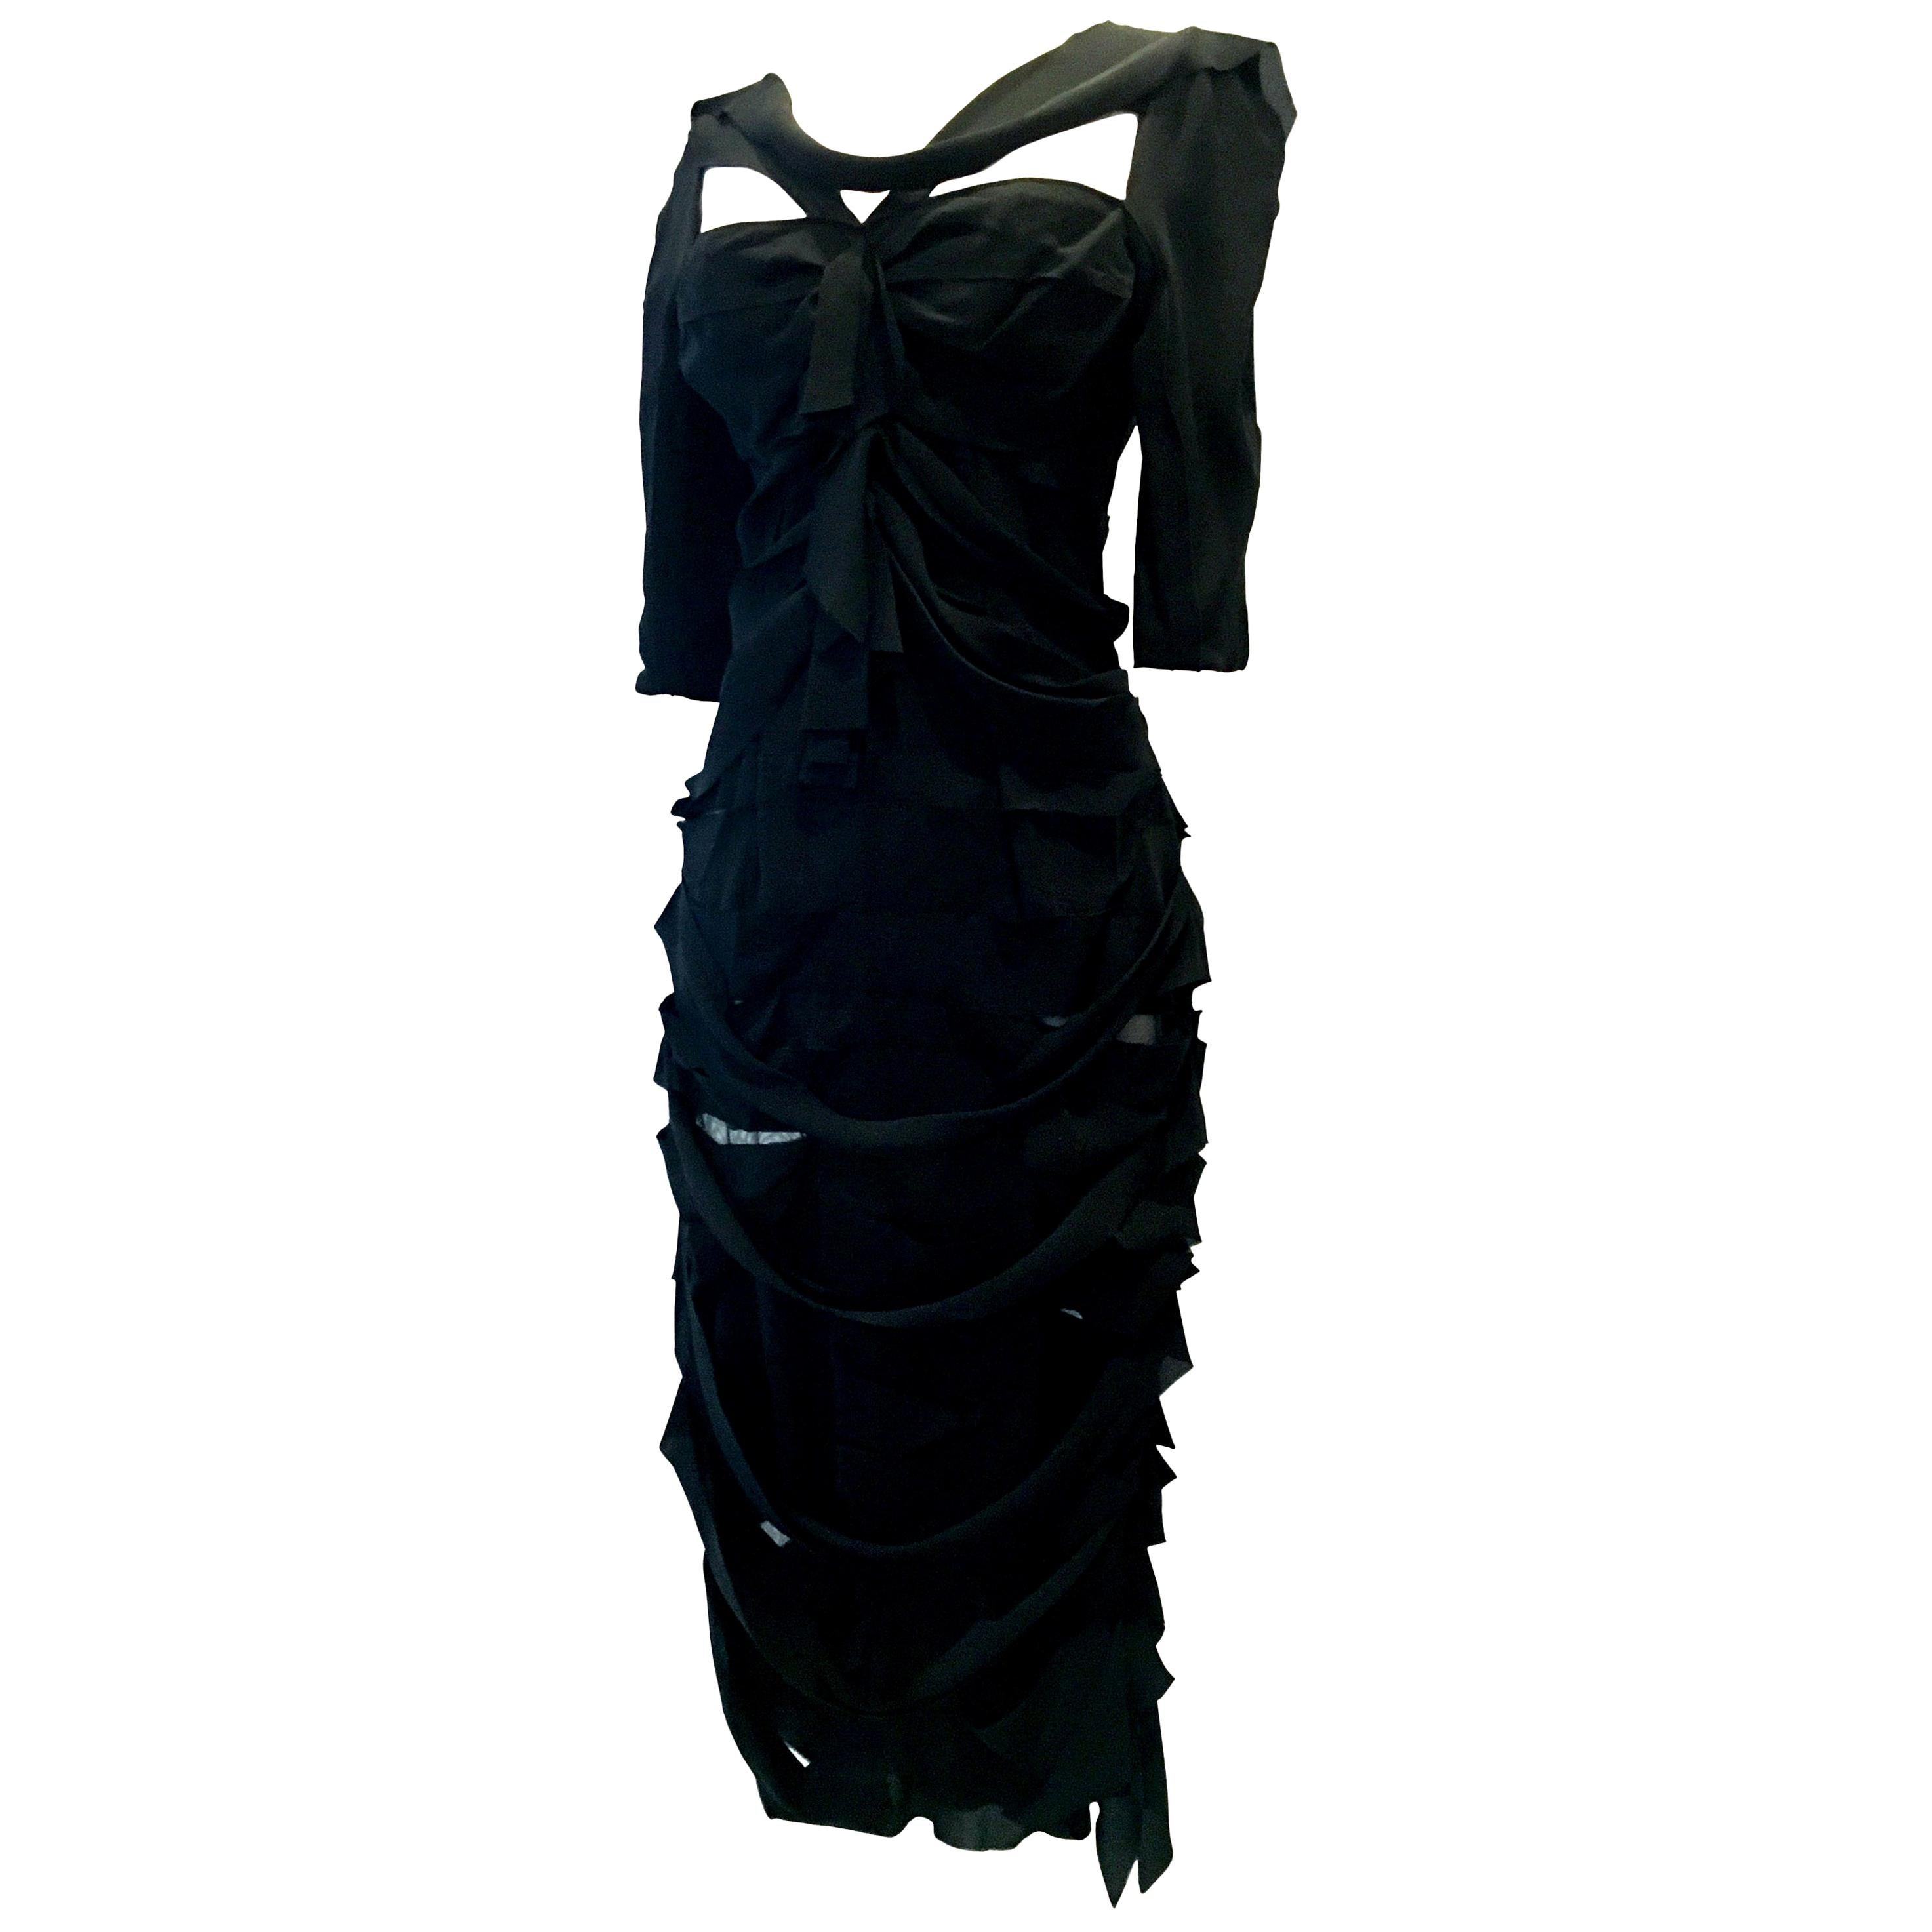 21st Century & New Black Silk Dress By, Nina Ricci Paris In New Condition For Sale In West Palm Beach, FL